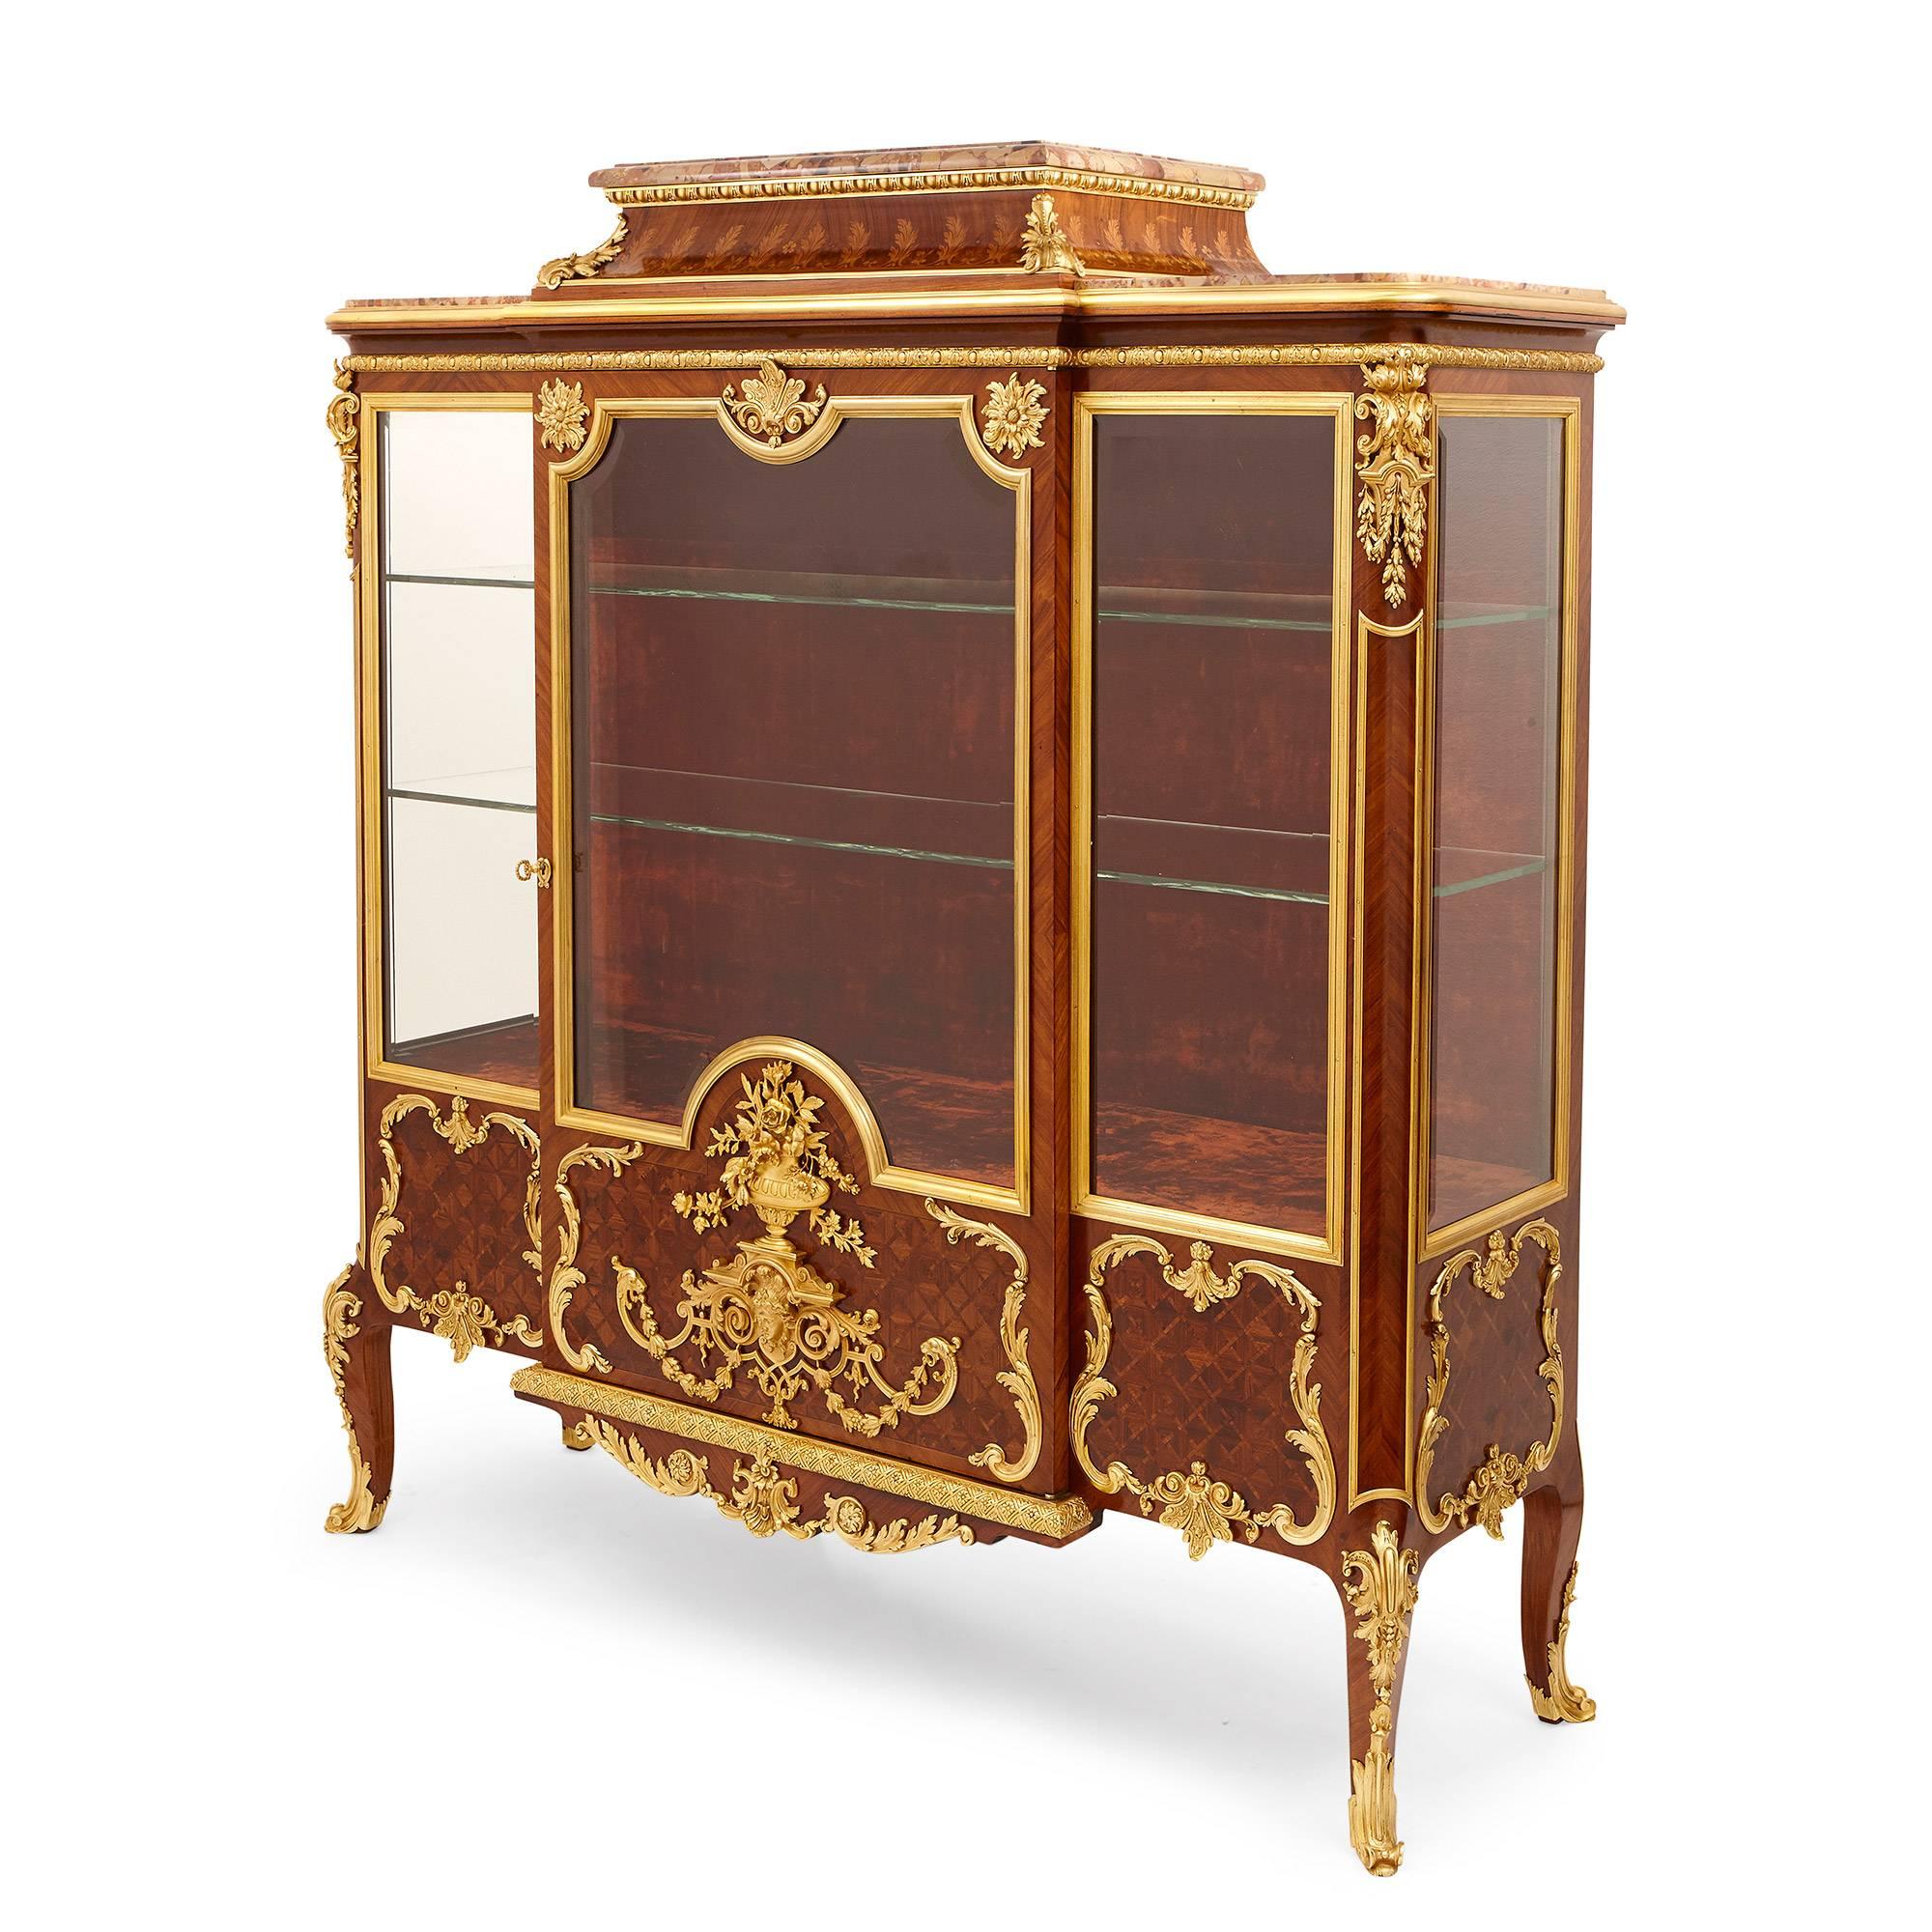 This fine antique vitrine is attributed to the famous French maker, Grimard, on account of its high quality materials and exquisite craftsmanship. 

The vitrine features three stepped marble tops, with the central top above a frieze of marquetry